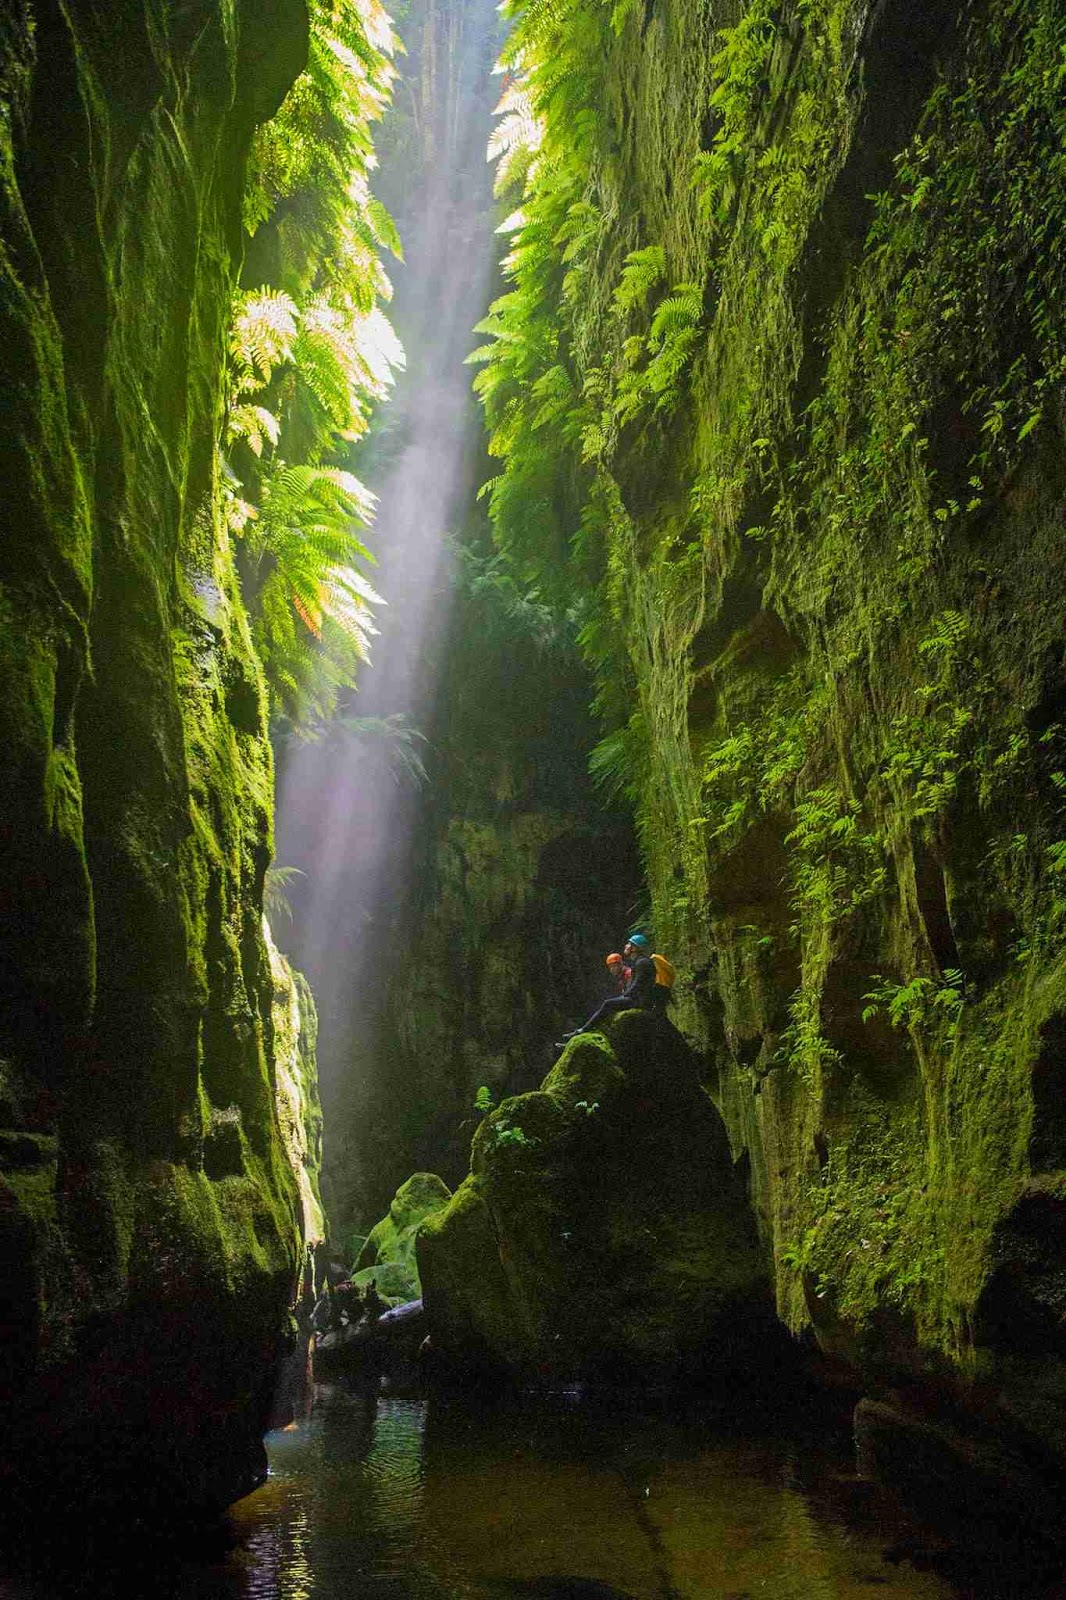 Claustral Canyon Of Blue Mountains National Park In New